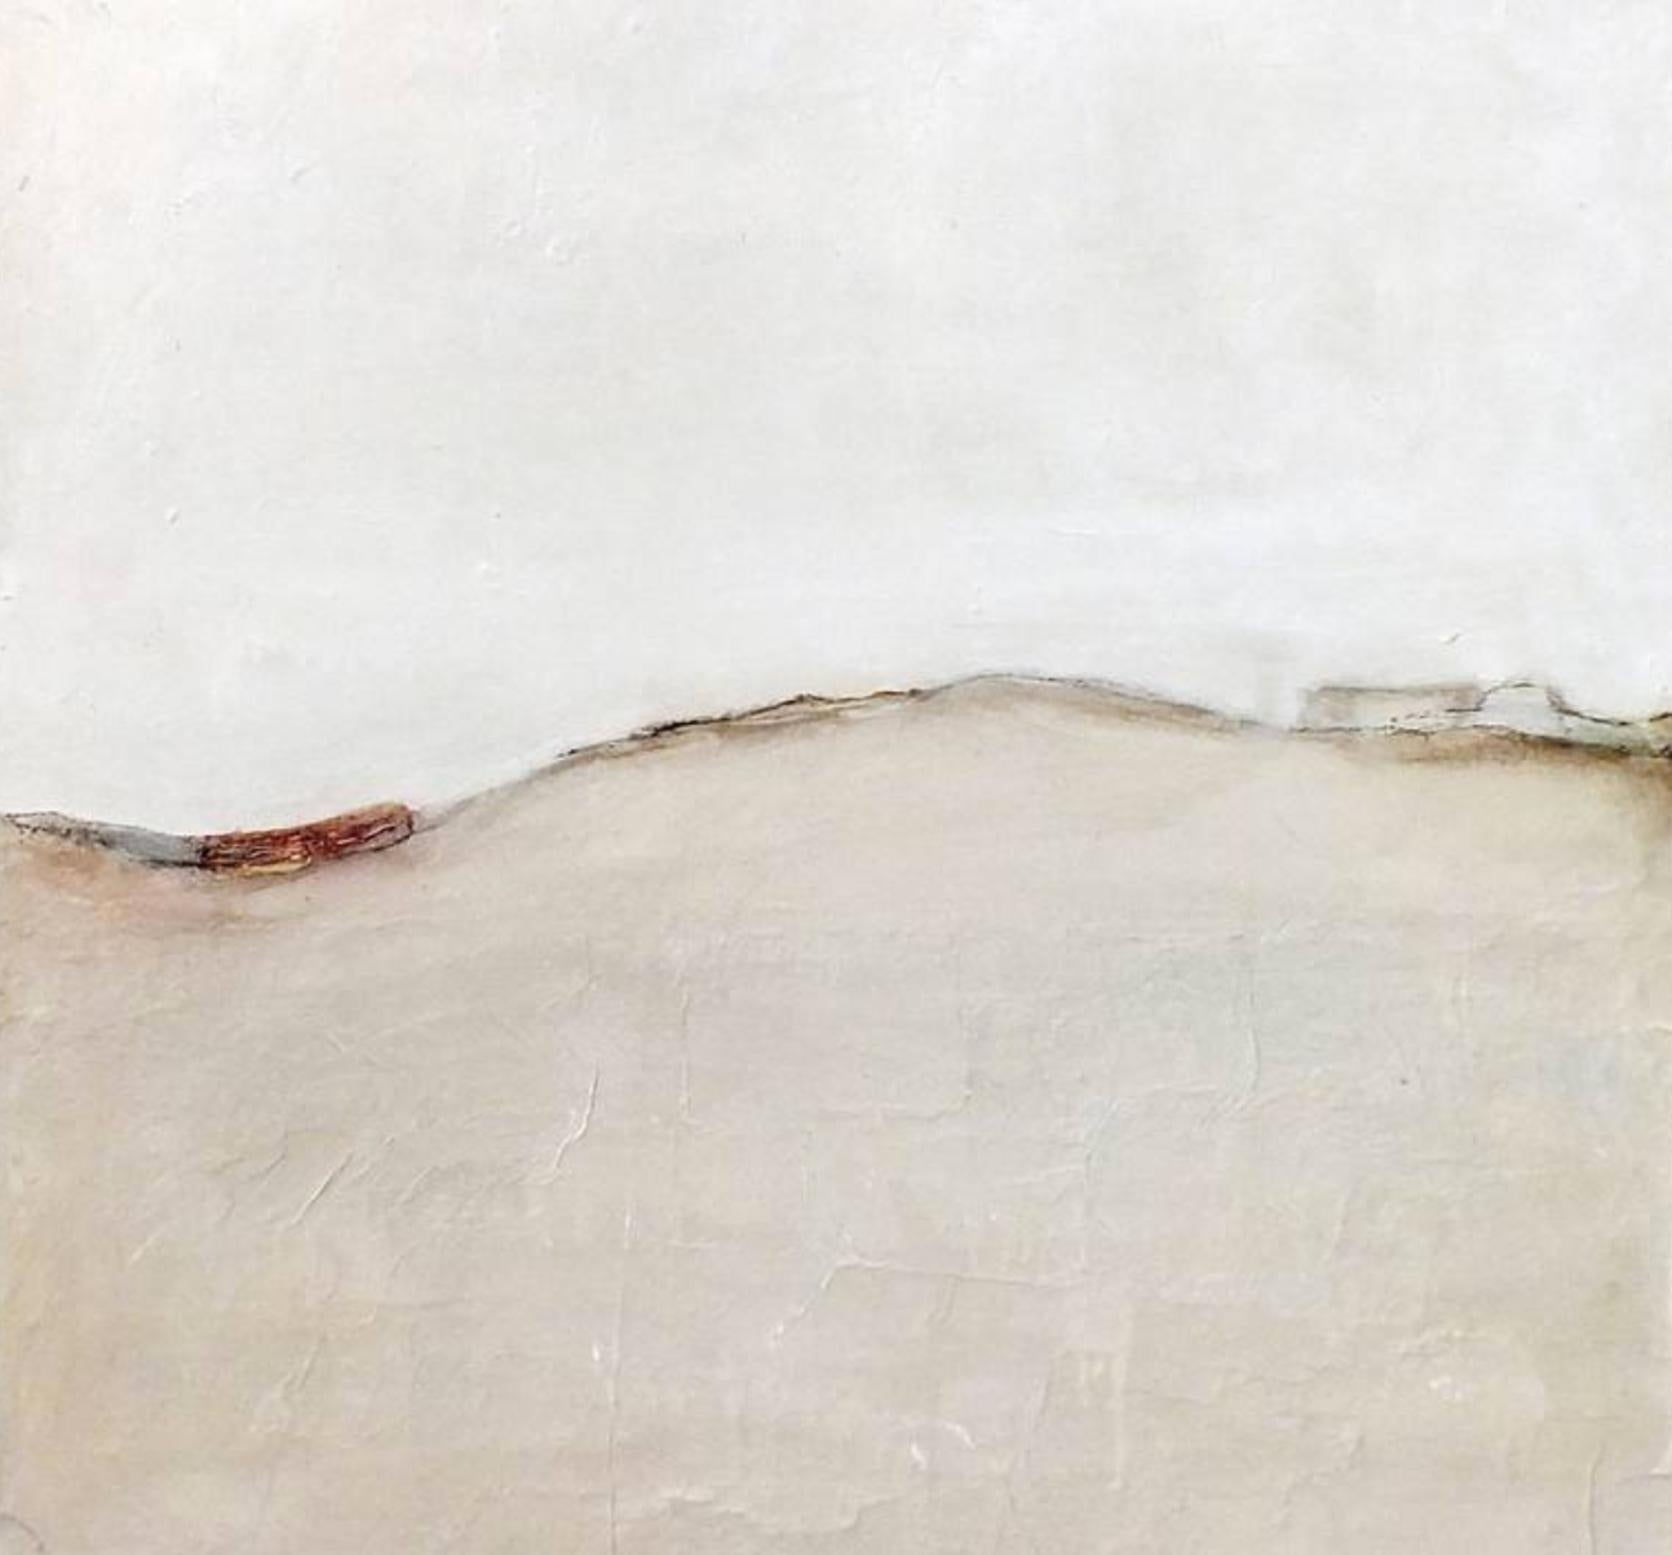 'Landscape 17' by Marilina Marchica is a peaceful beige pastel colors minimalist abstract painting on canvas with a prominent mixed-media texture and strong brown accents. Landscapes, seascapes, nature, and charm of decaying city walls in Italy